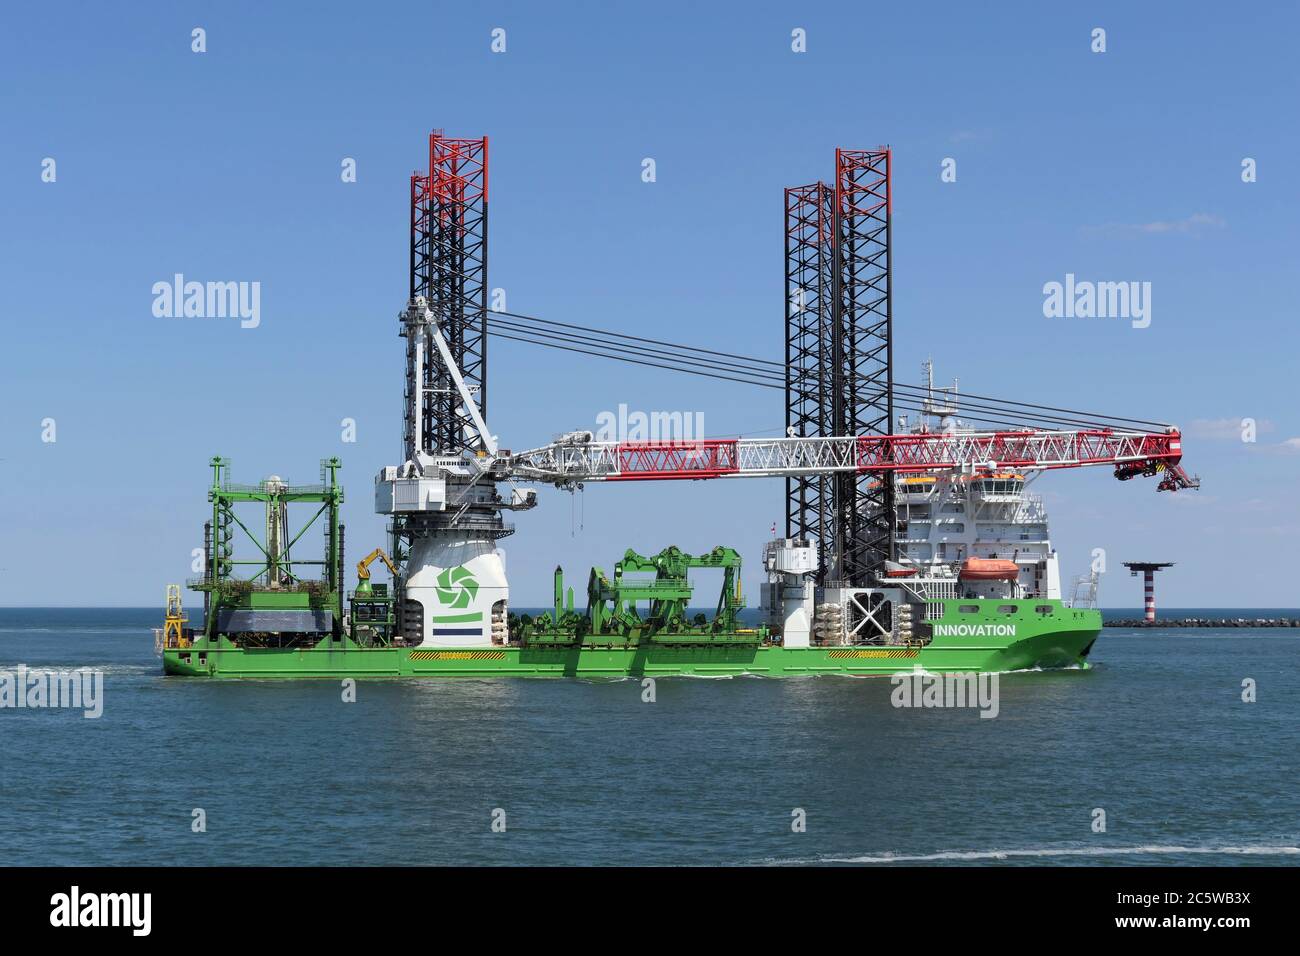 The Offshore Supply Ship Innovation will reach the port of Rotterdam on May 30, 2020. Stock Photo